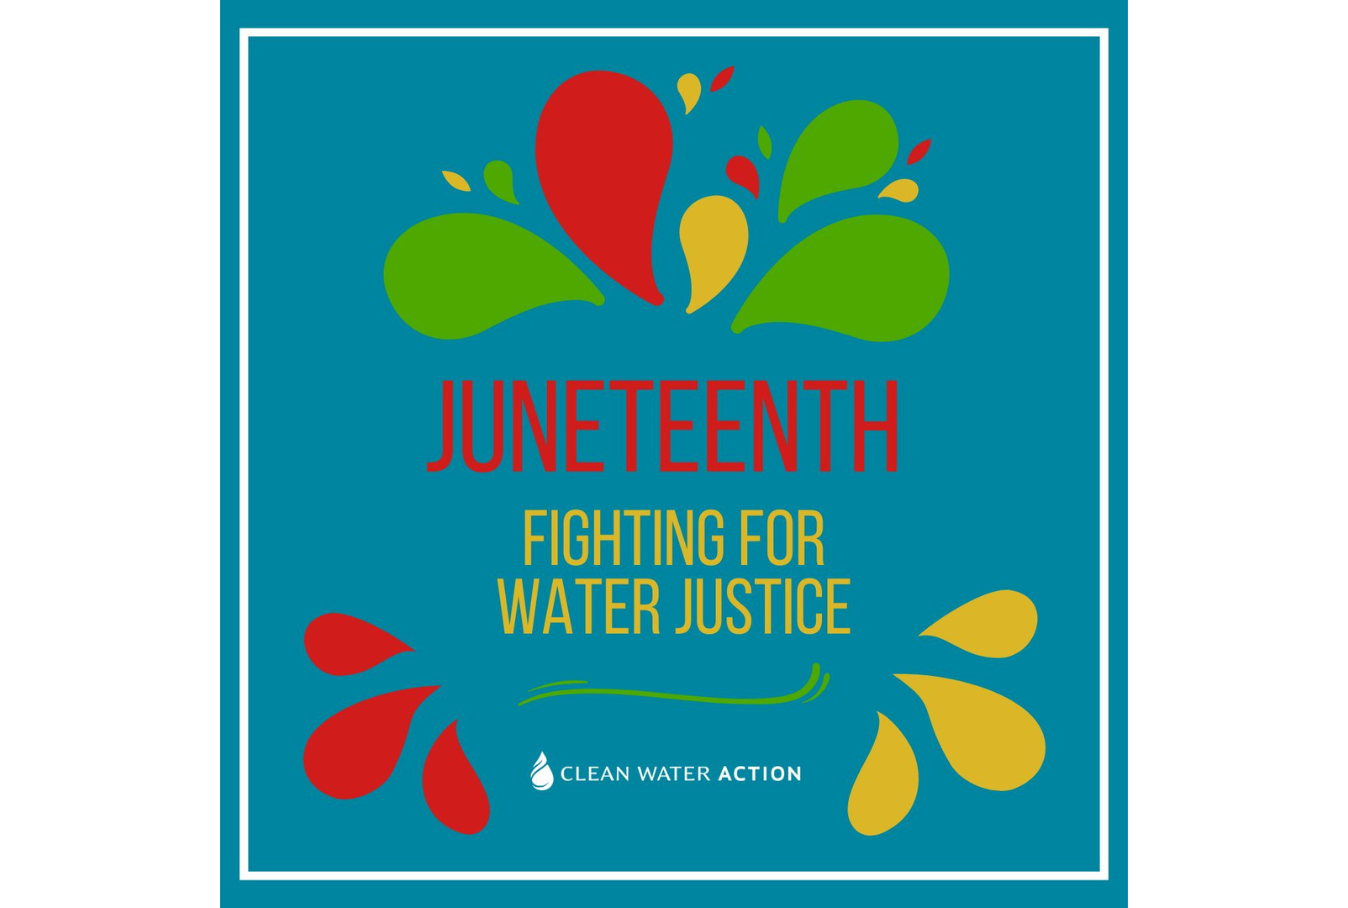 Image of Juneteenth graphic with Clean Water Action logo and text that says Fighting for Water Justice